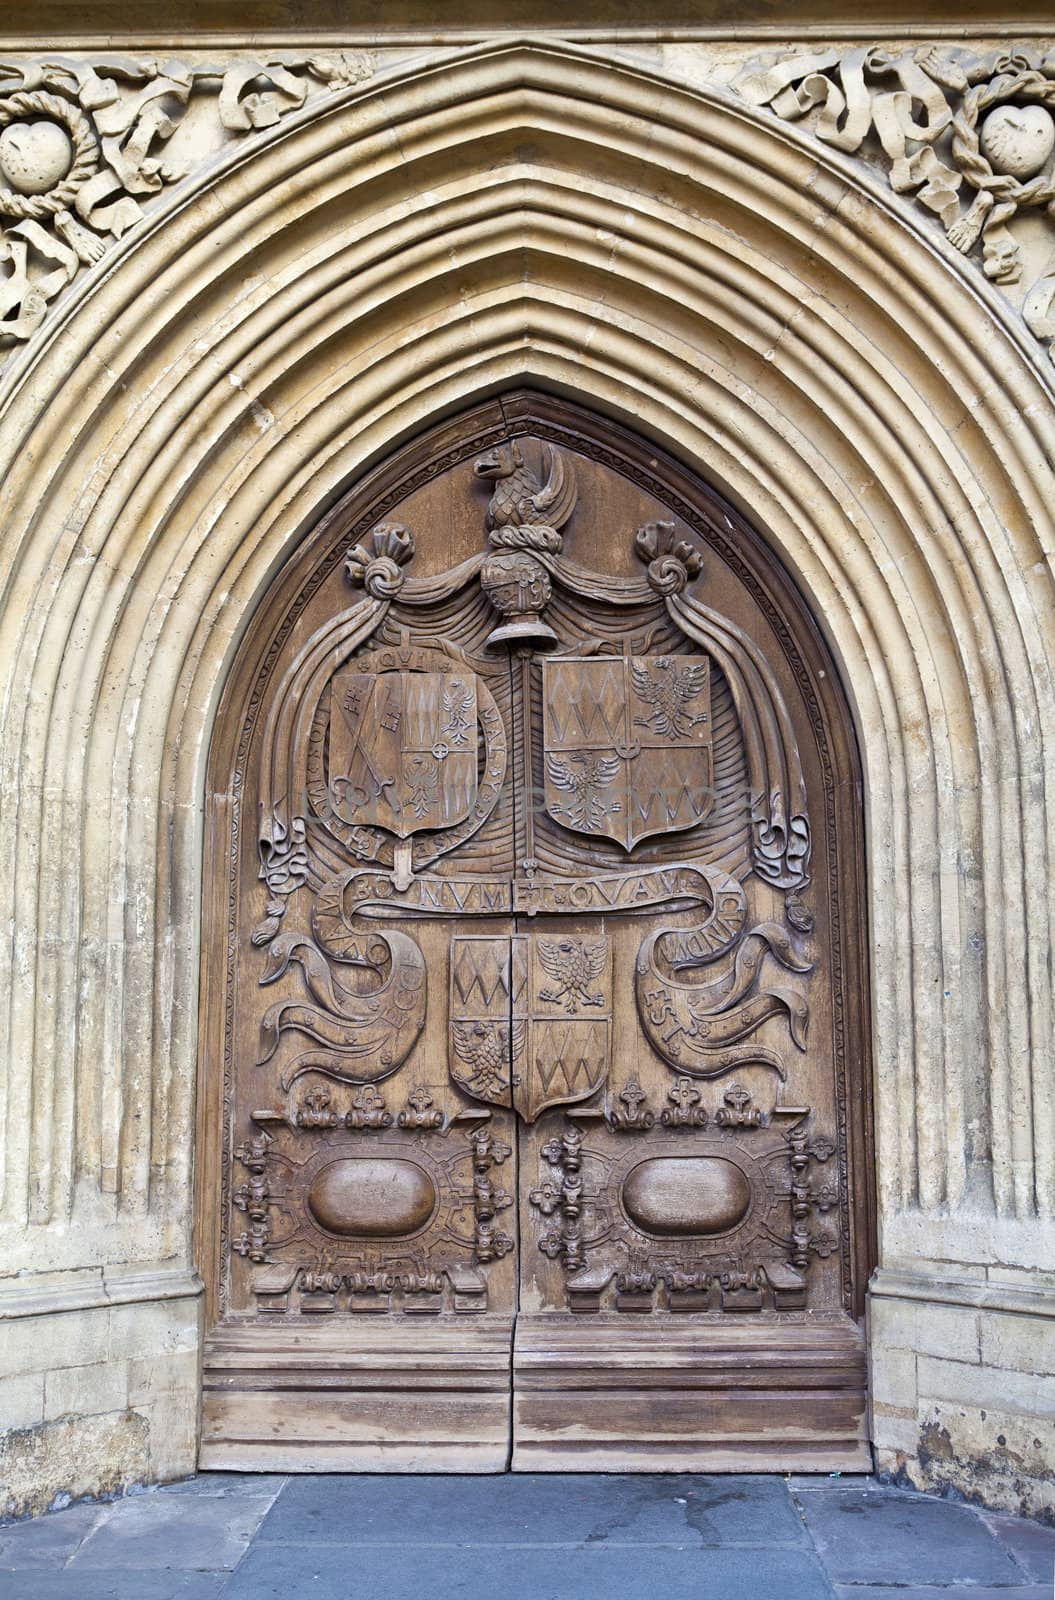 The beautifully detailed doorway at Bath Abbey in Somerset.